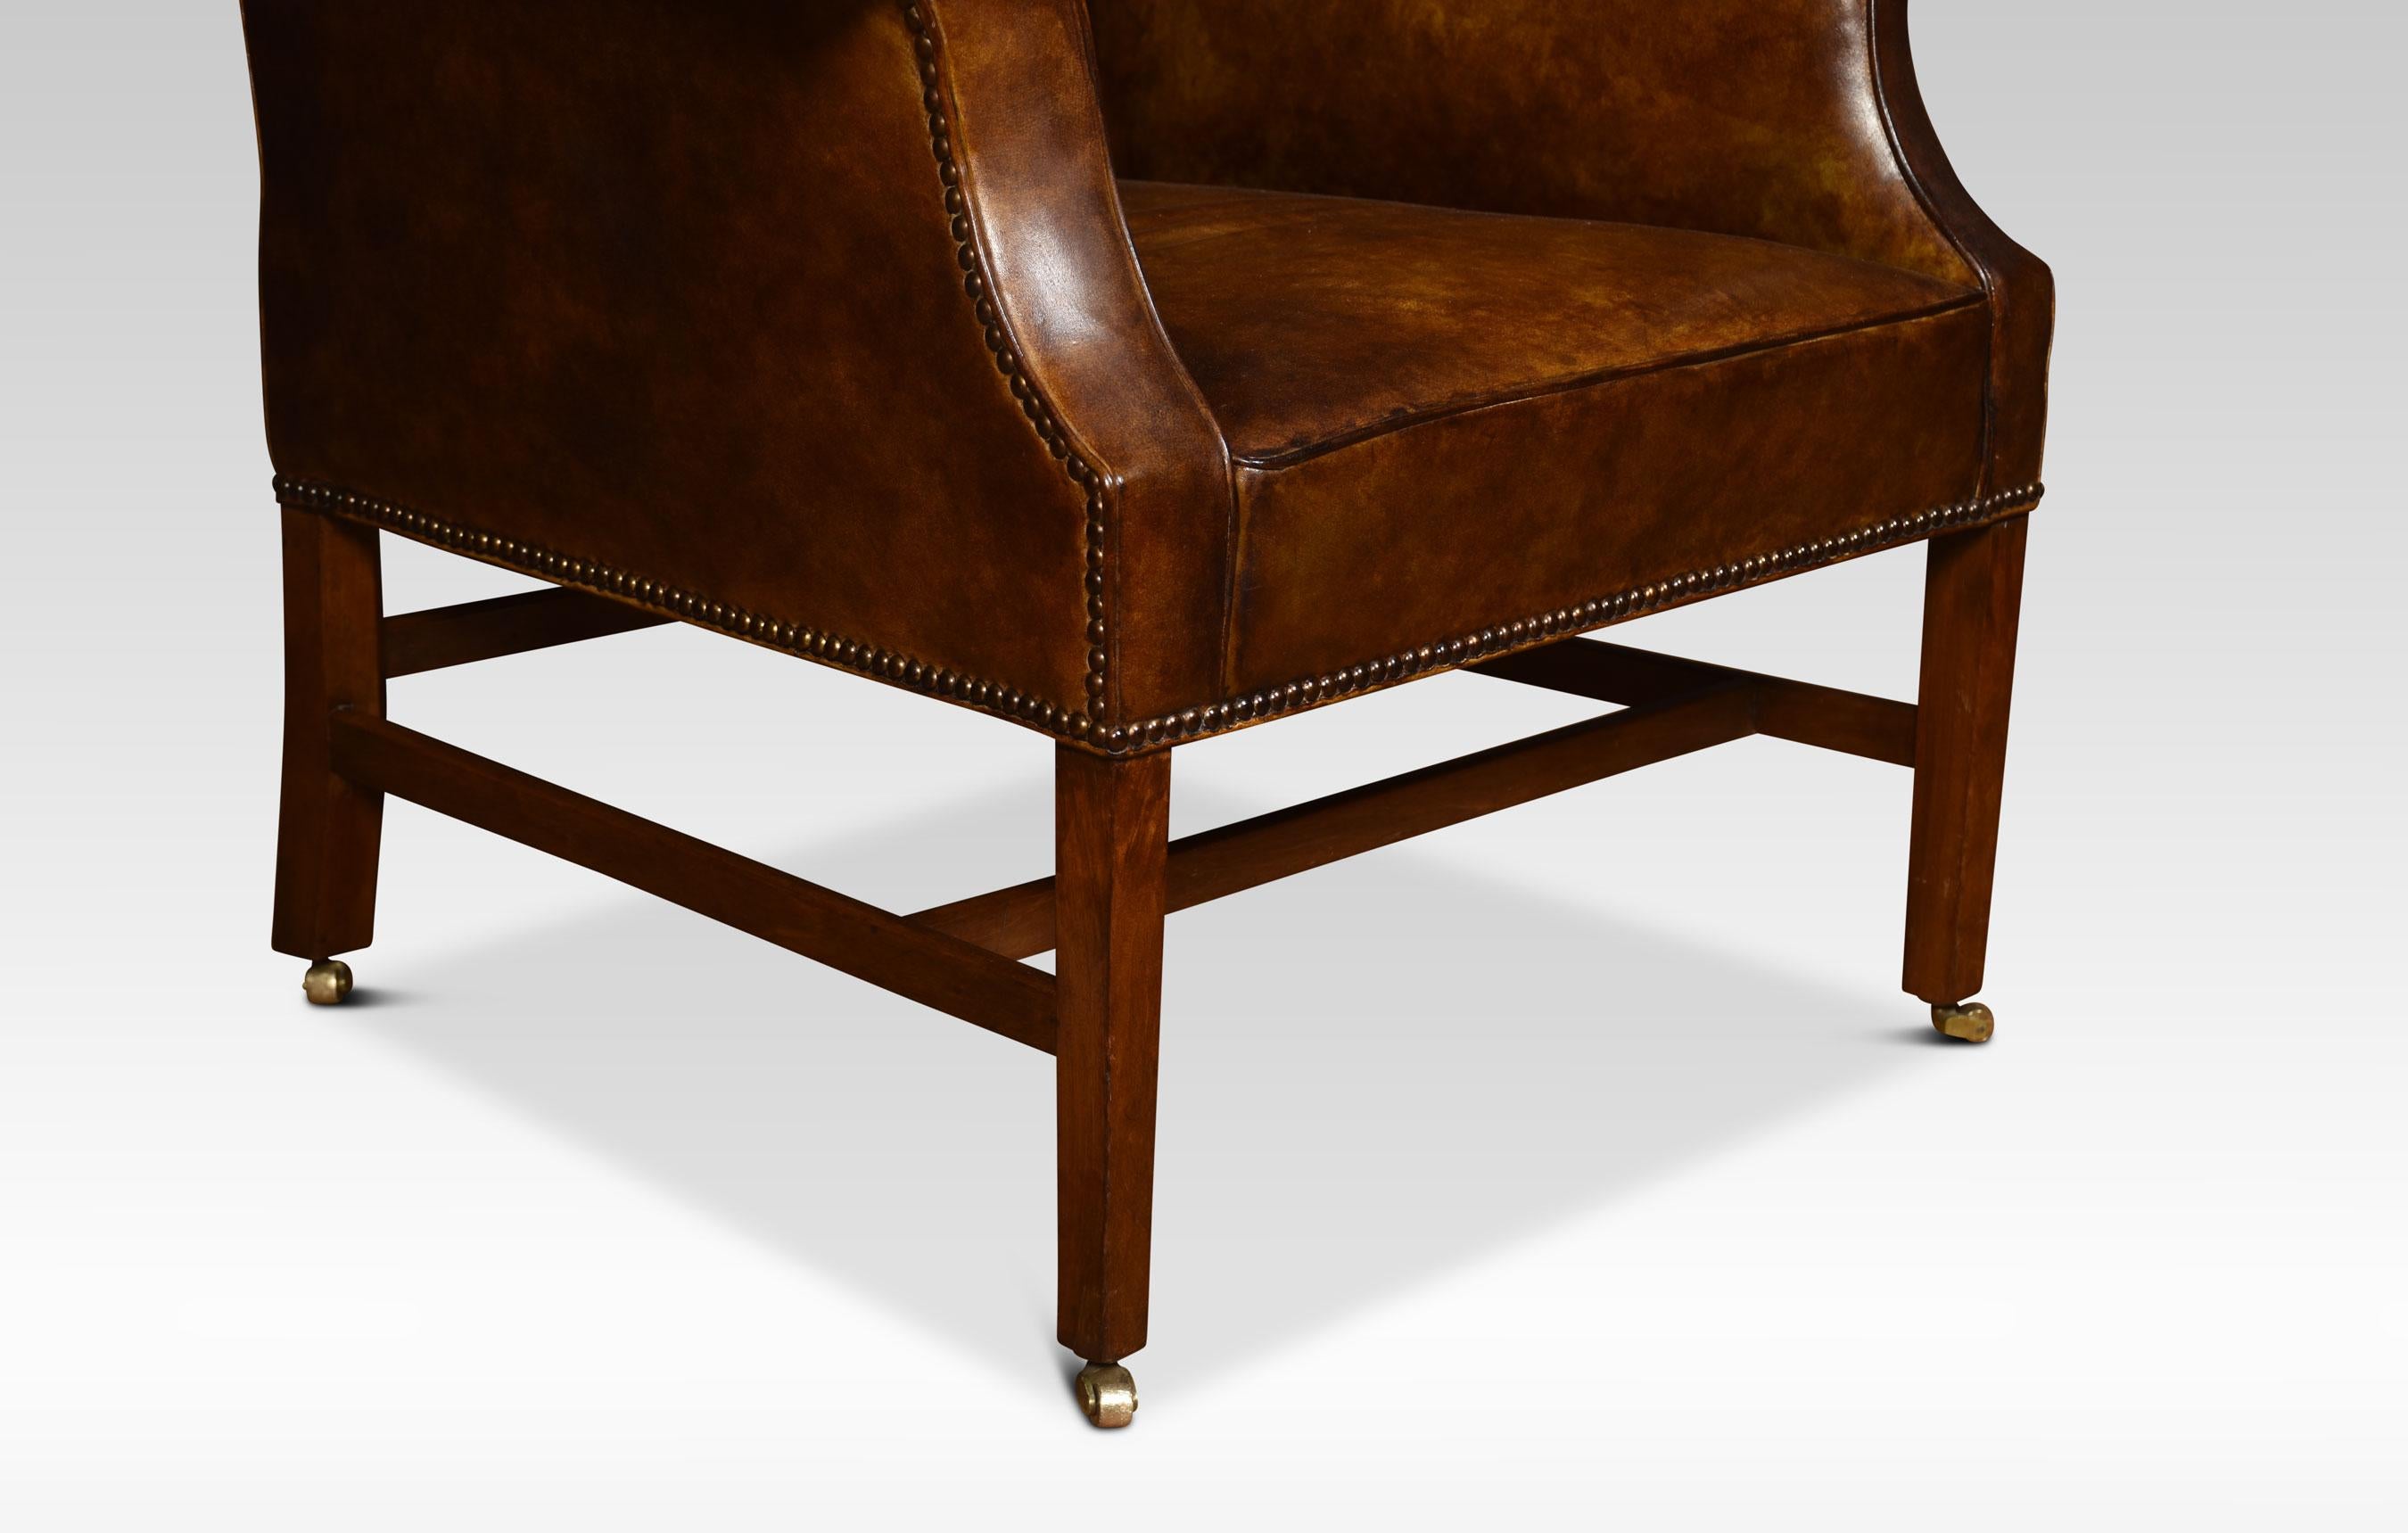 British Brown Leather Upholstered Wingback Armchair